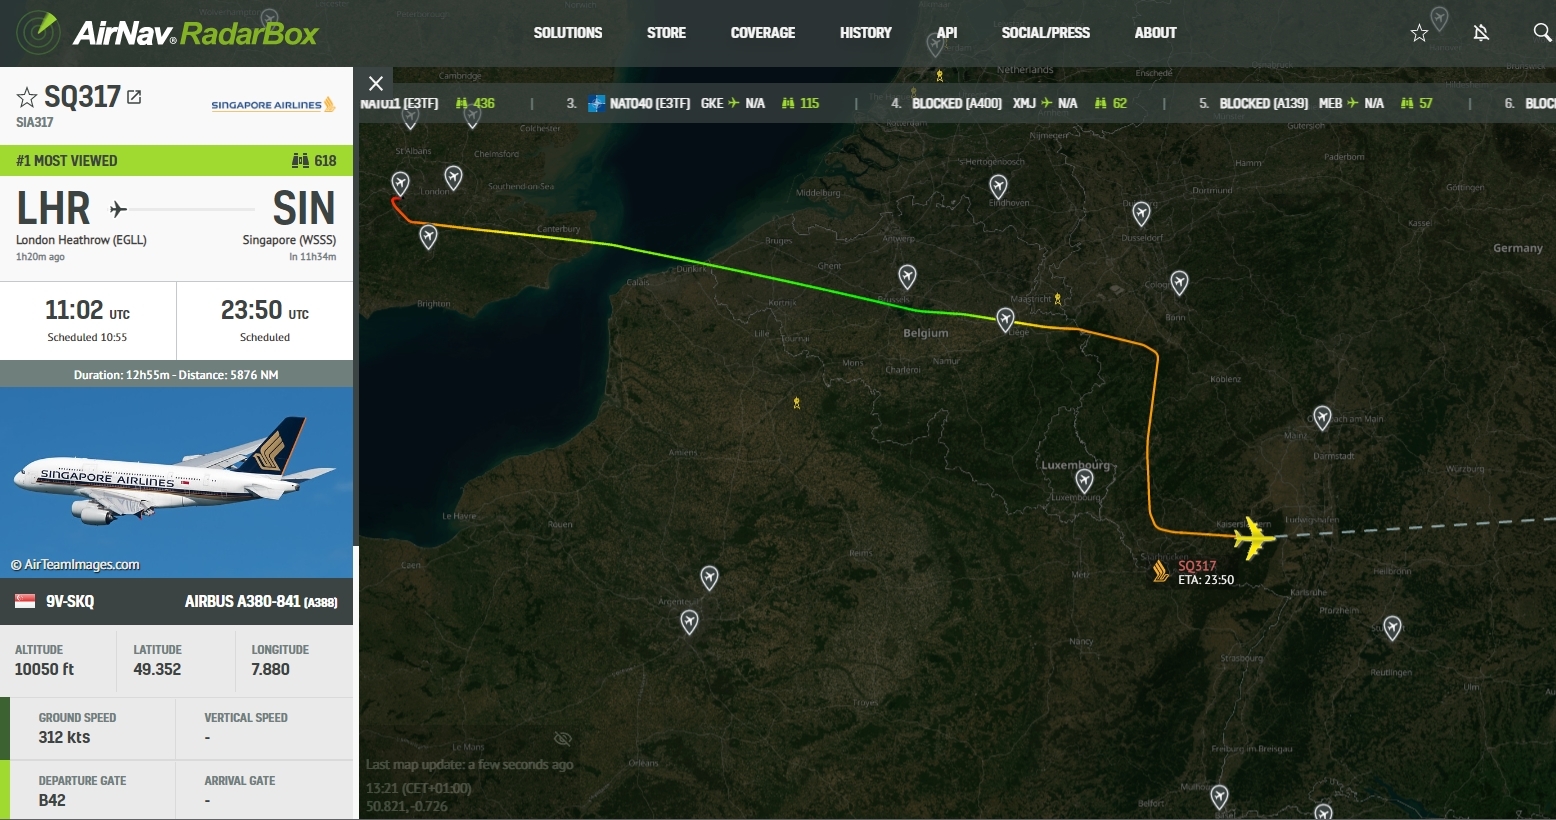 sq317-singapore-airlines-a380-declares-emergency-over-europe